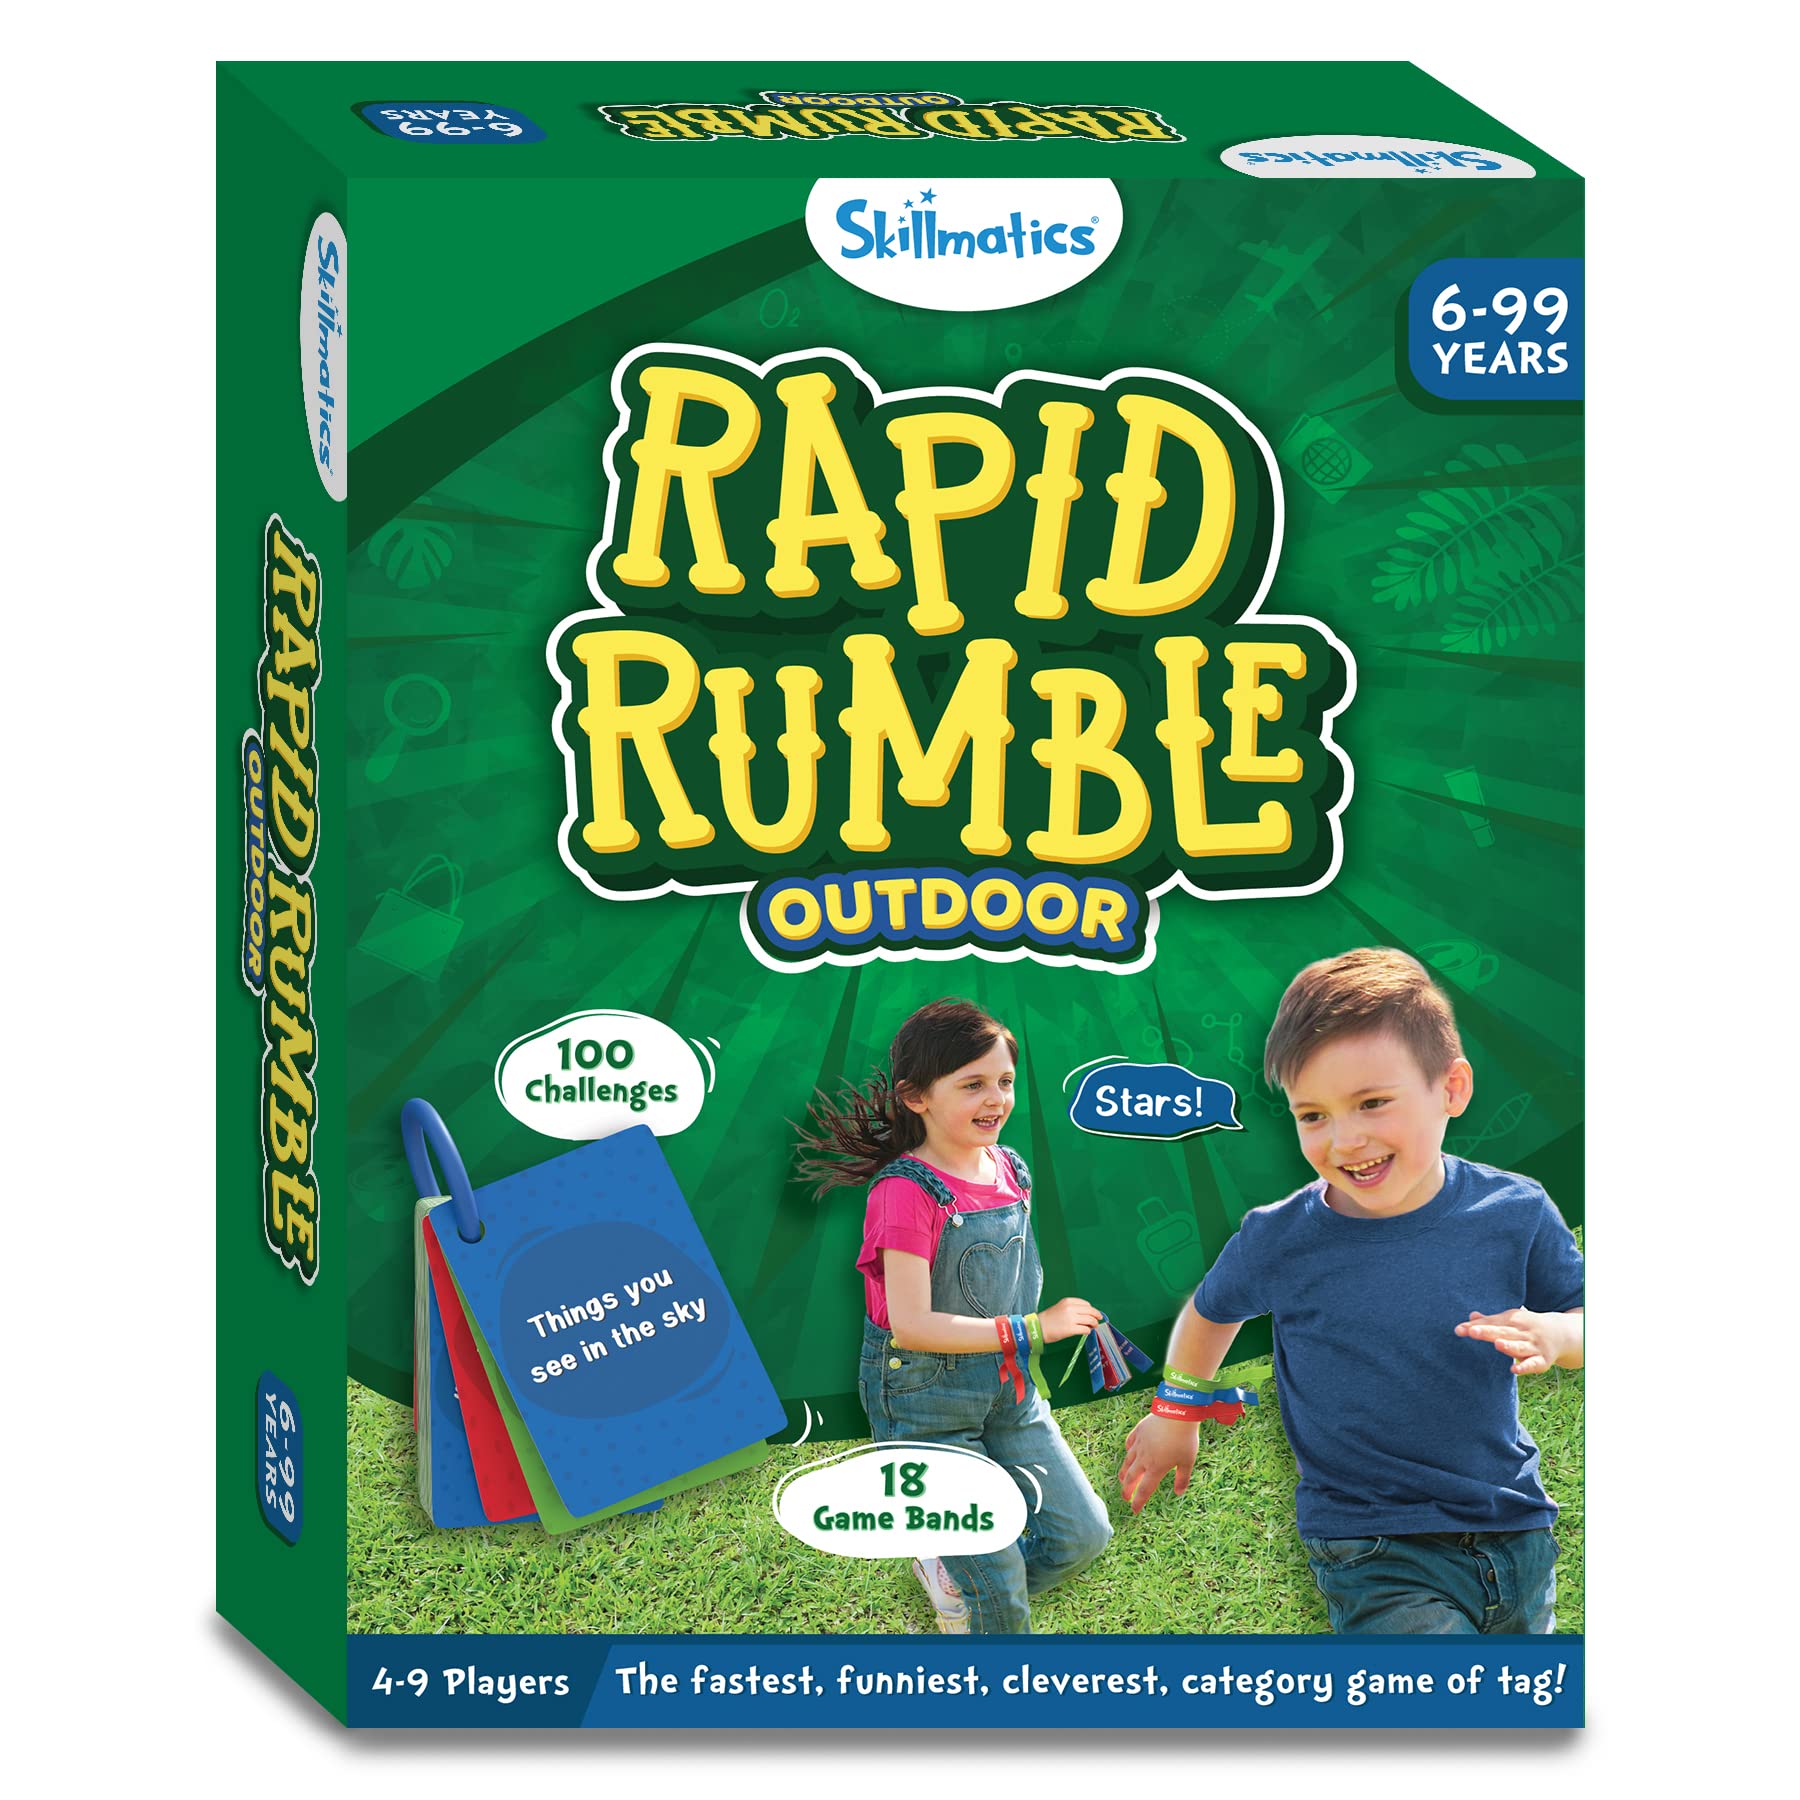 Skillmatics Rapid Rumble Outdoor Edition, Educational & Clever Category Game of Tag, Games for Kids, Teens & Adults